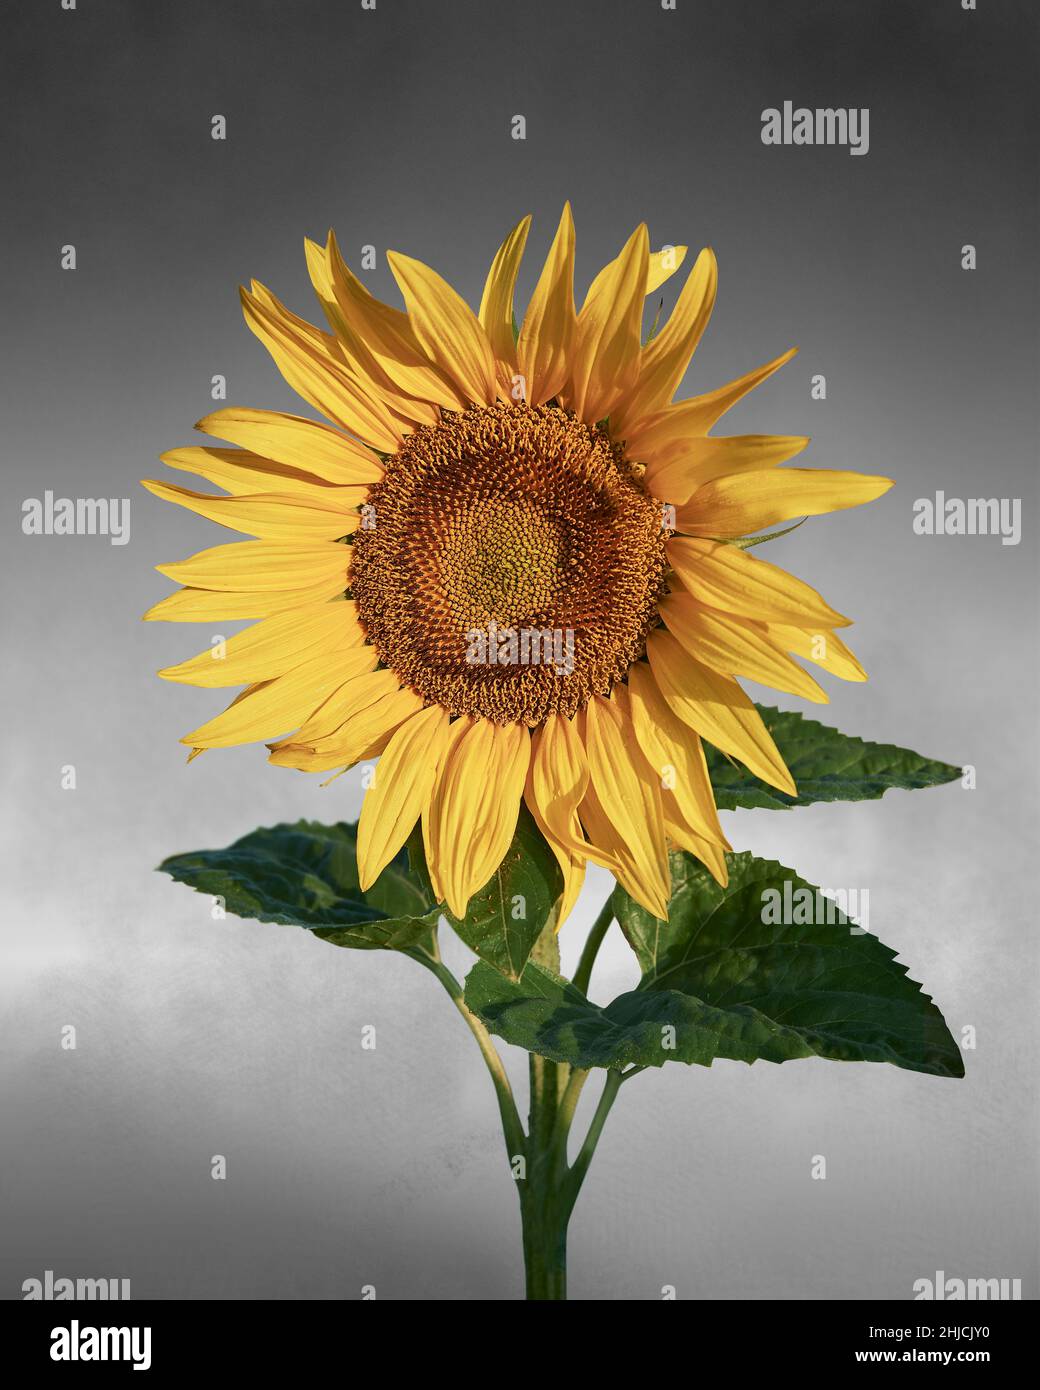 Single flowering sunflower head (Helianthus Annus). Yellow sunflower cut out  against a grey background Stock Photo